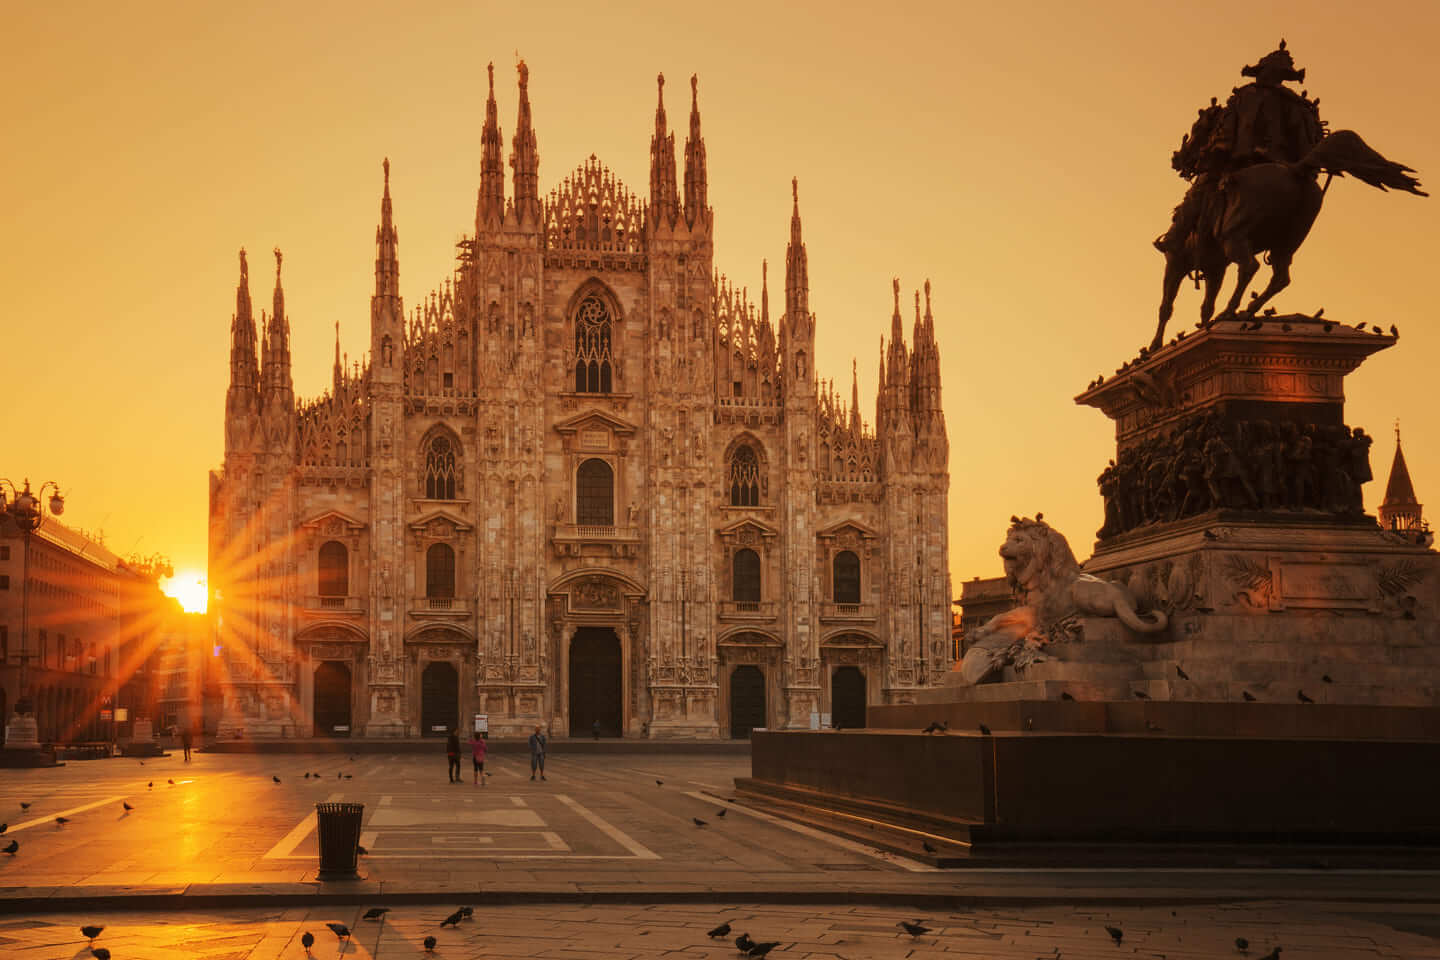 the cathedral of milan seen from the front with the sunset